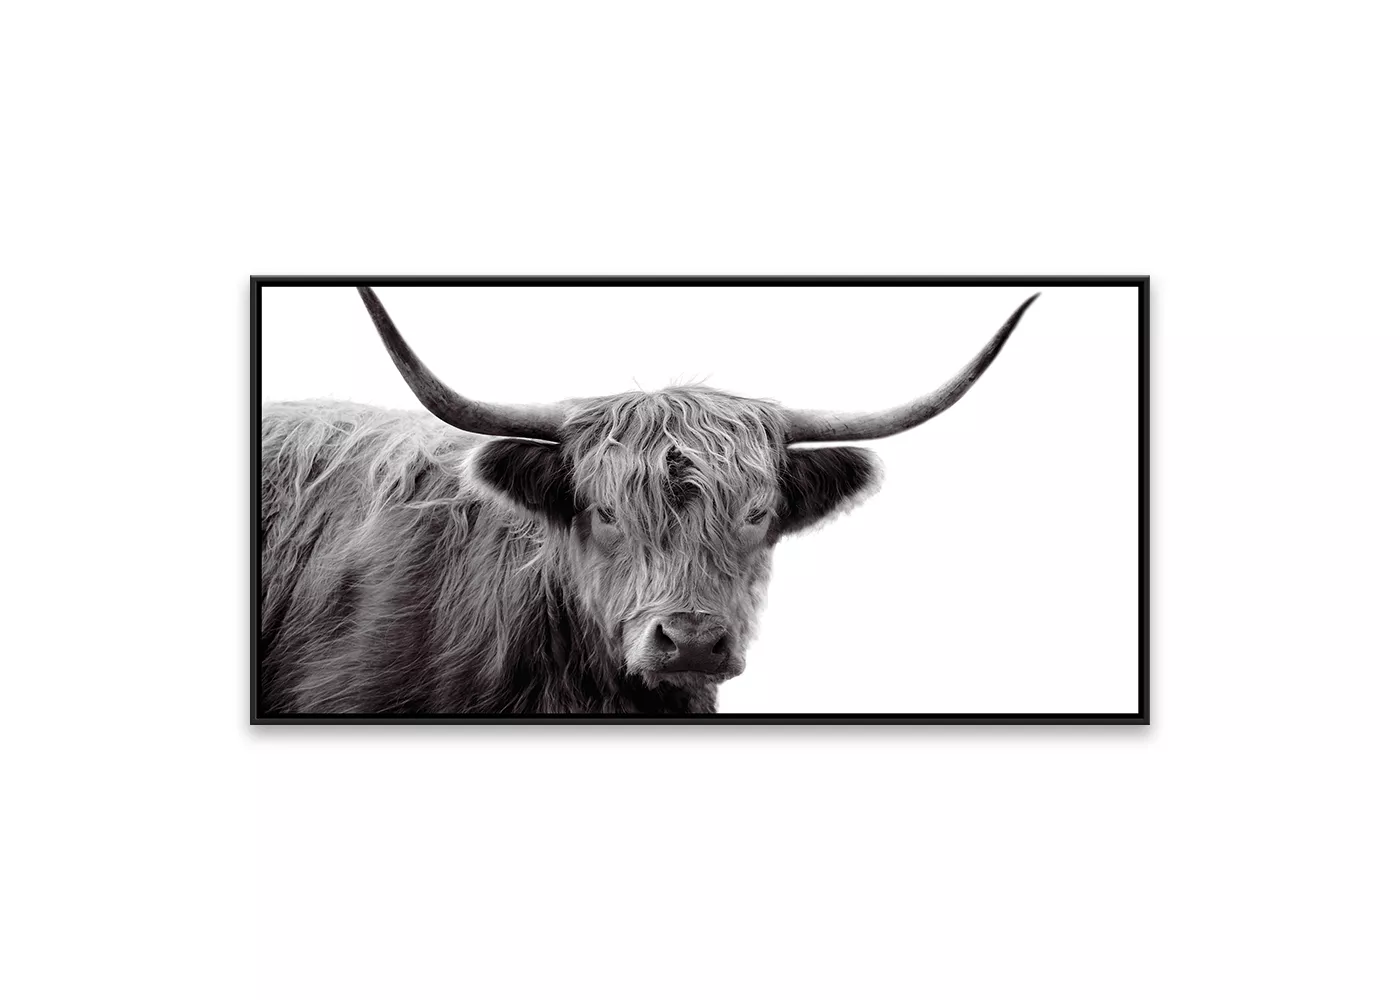 24.25"x48.25" Black & White Highland Cow Framed Wall Canvas - Threshold™ - image 1 of 8